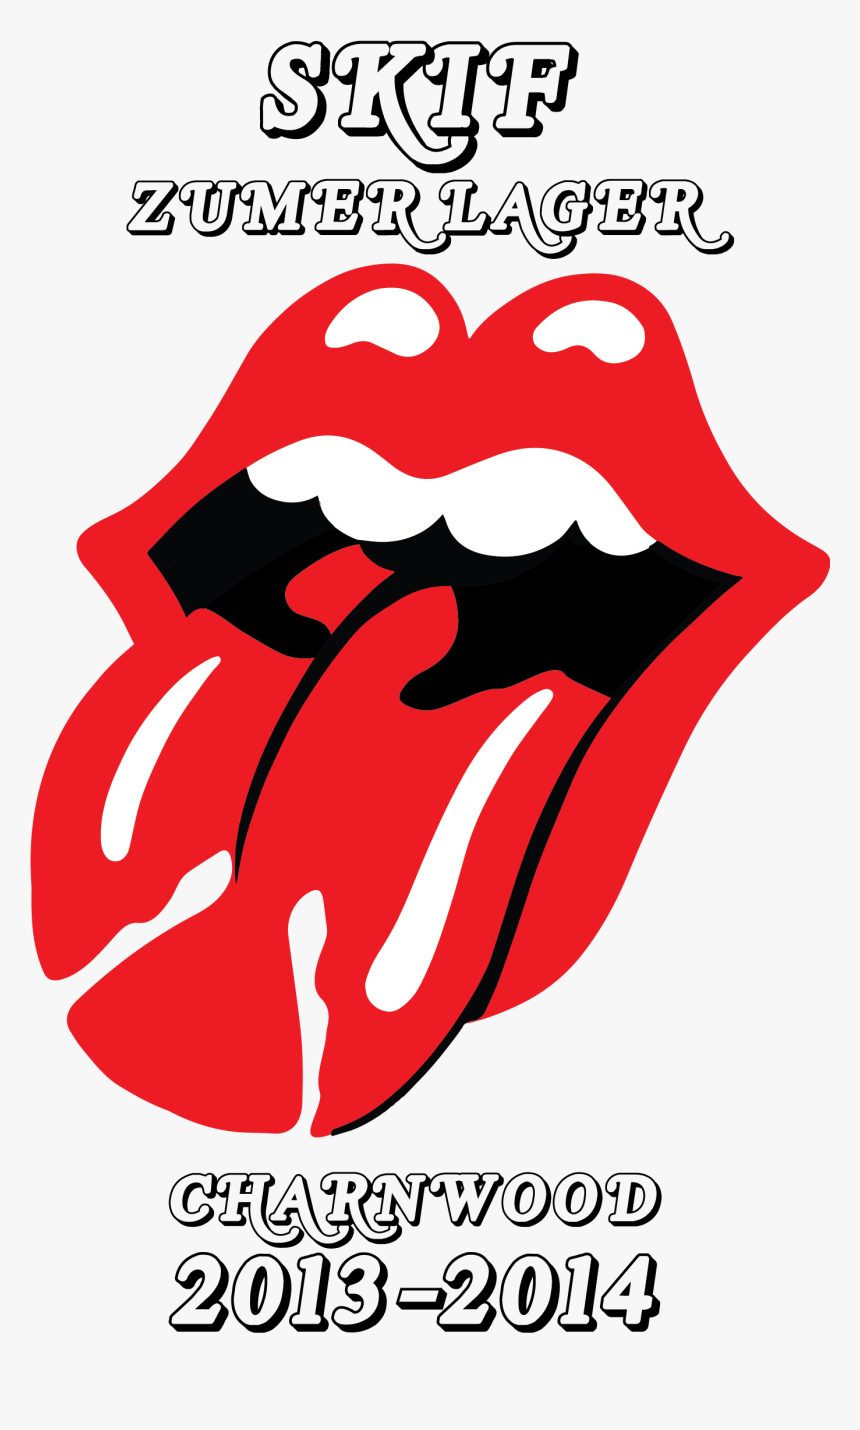 Milton Glaser Rolling Stones, HD Png Download, Free Download